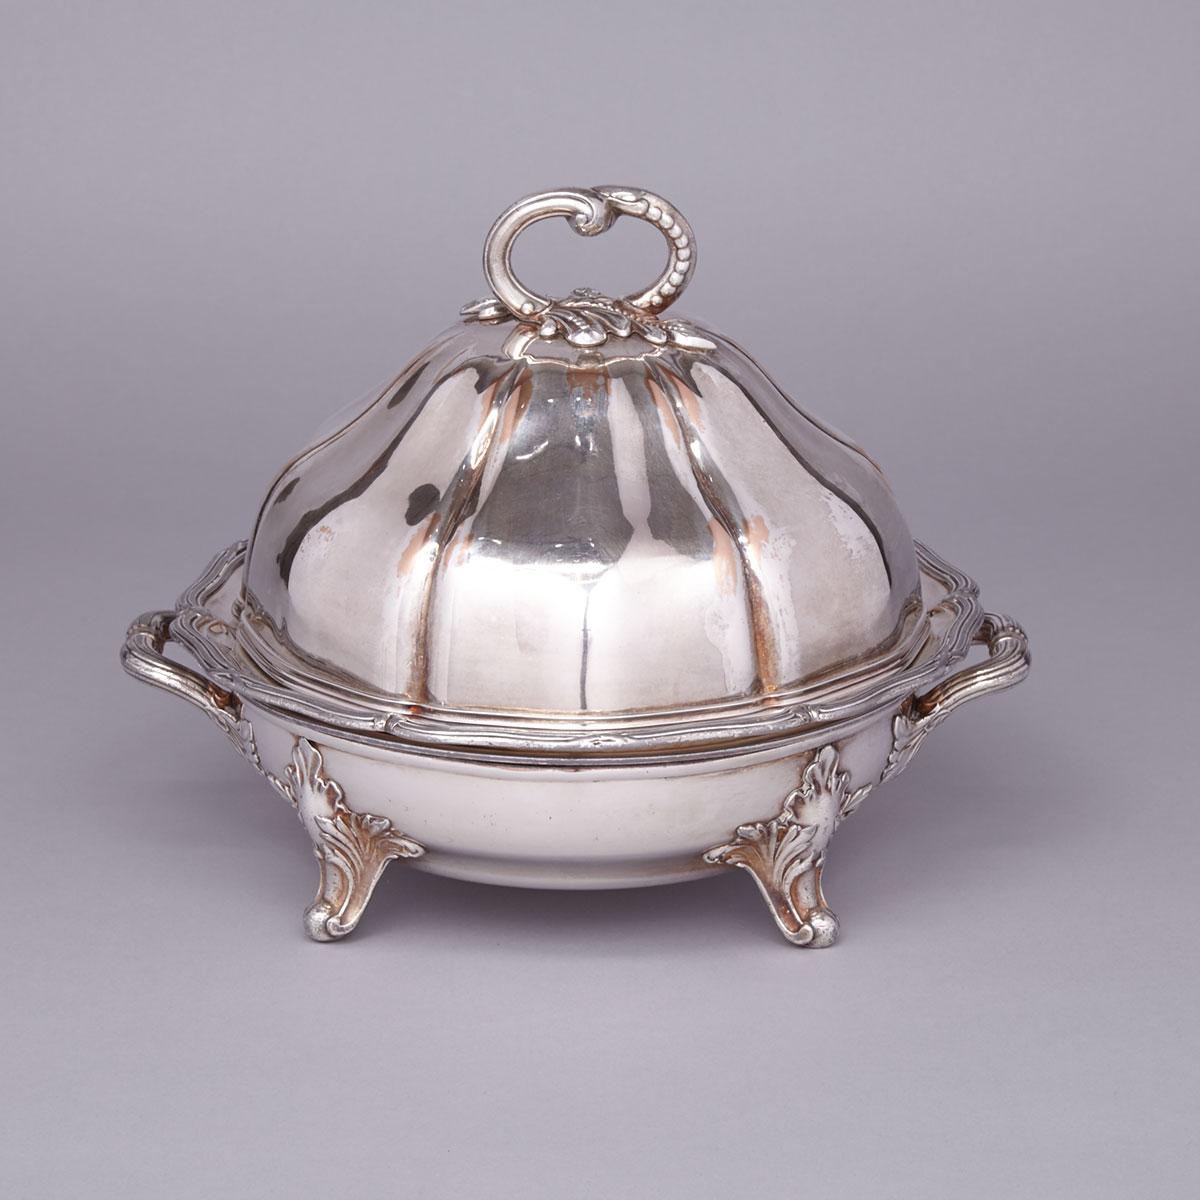 Old Sheffield Plate Covered Entrée Dish with Warming Stand, c.1840